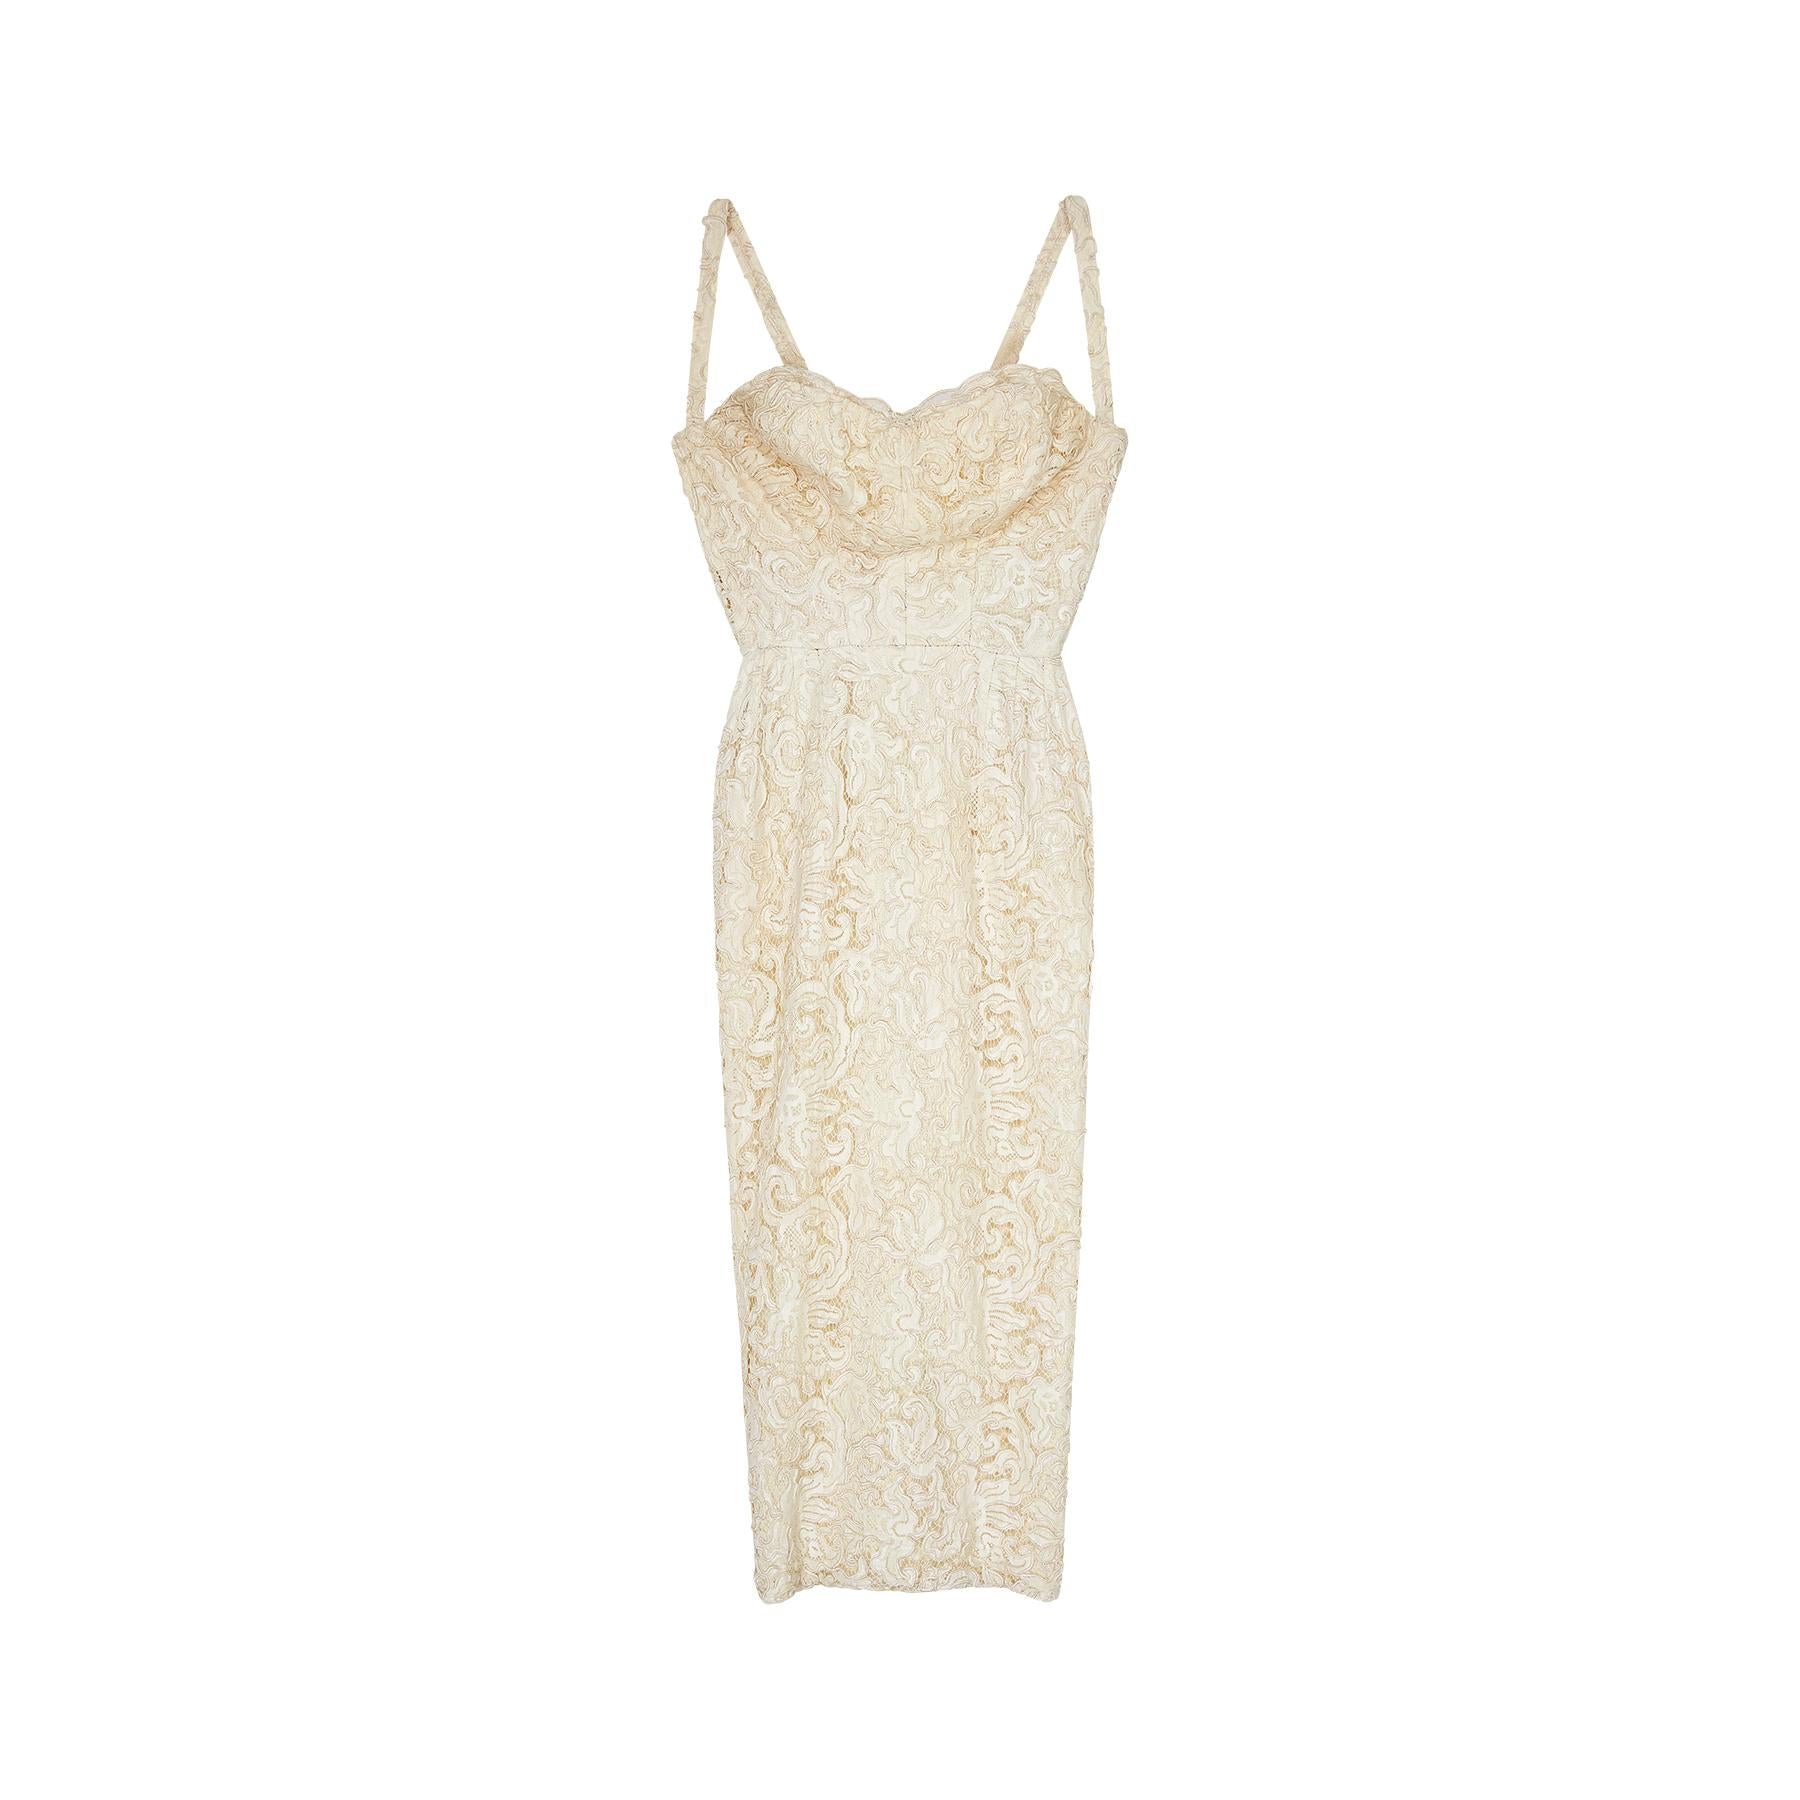 This French haute couture 1950s cream lace bustier dress hugs the female silhouette to perfection.   The lace is incredibly intricate and has a lovely thickness to it - a testament to its quality. The bust area features a sweetheart neckline and